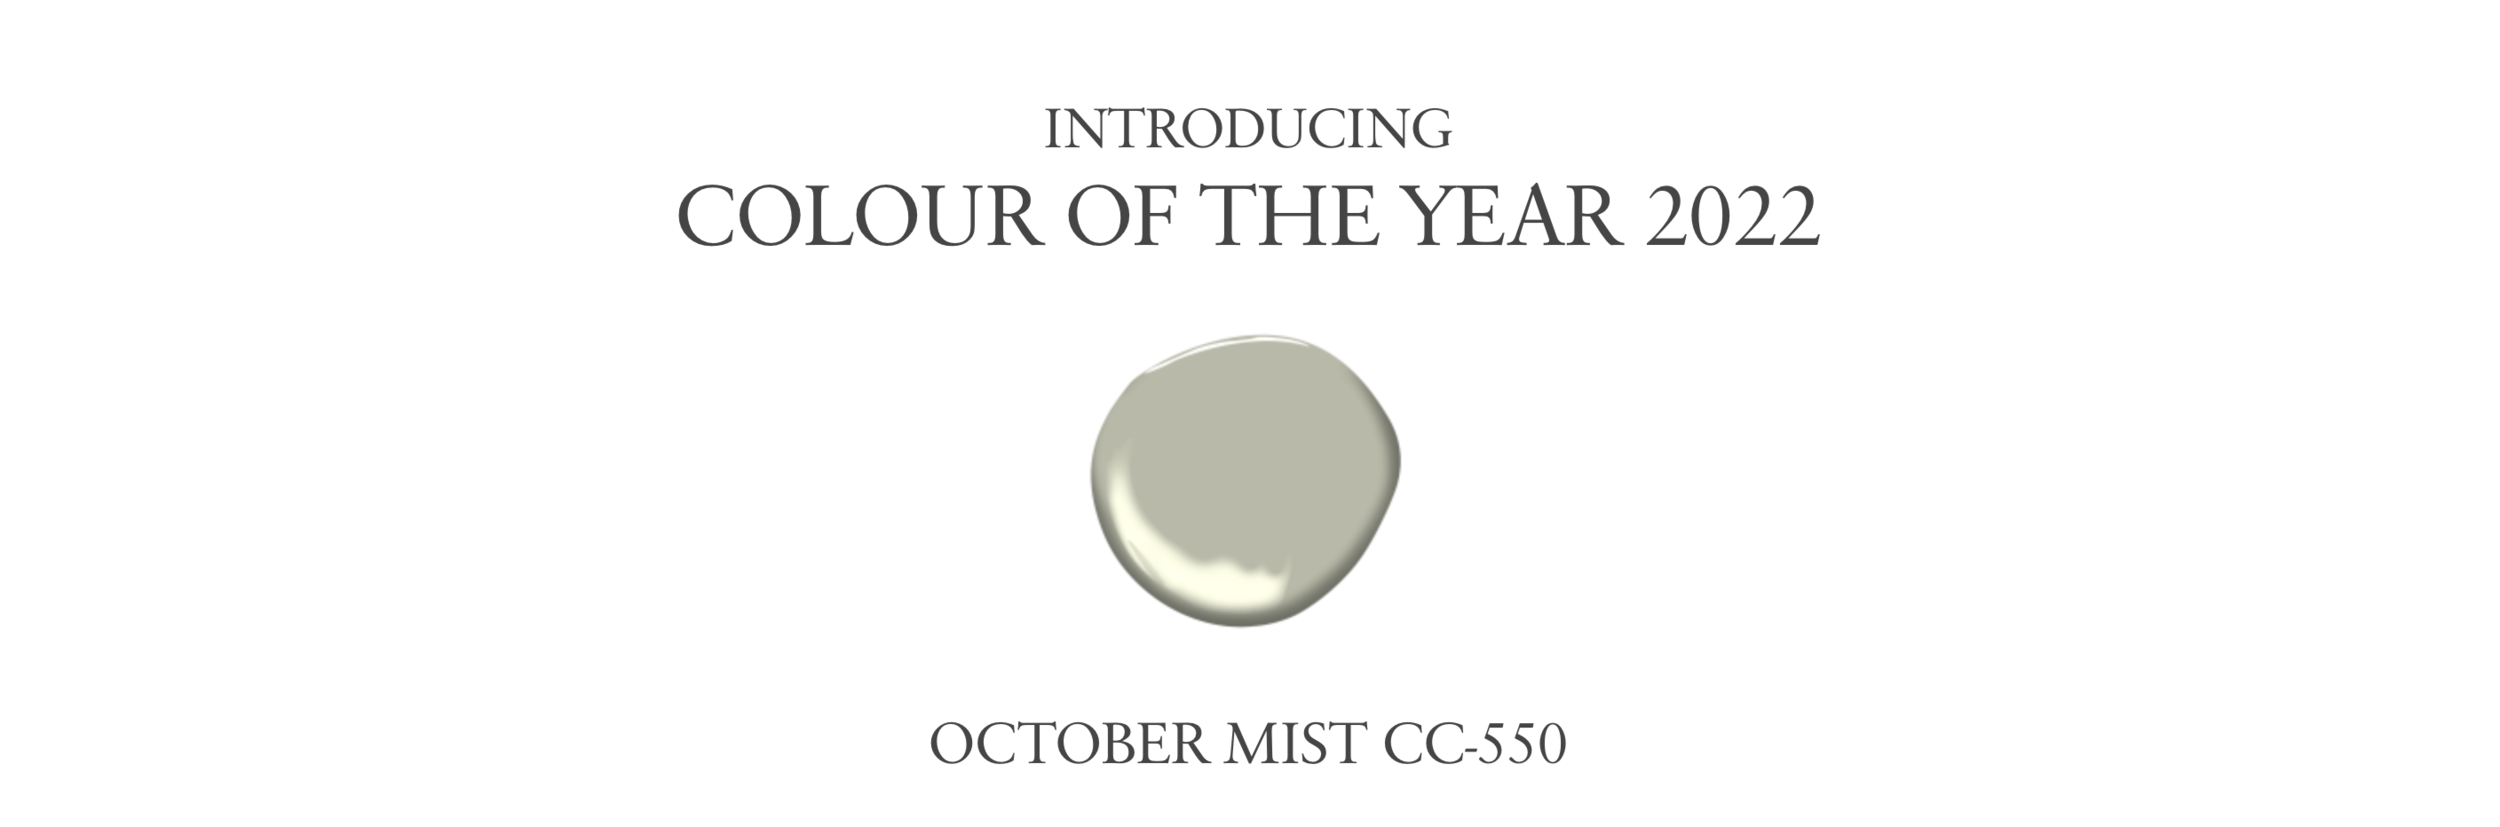 color of the year 2022 benjamin moore